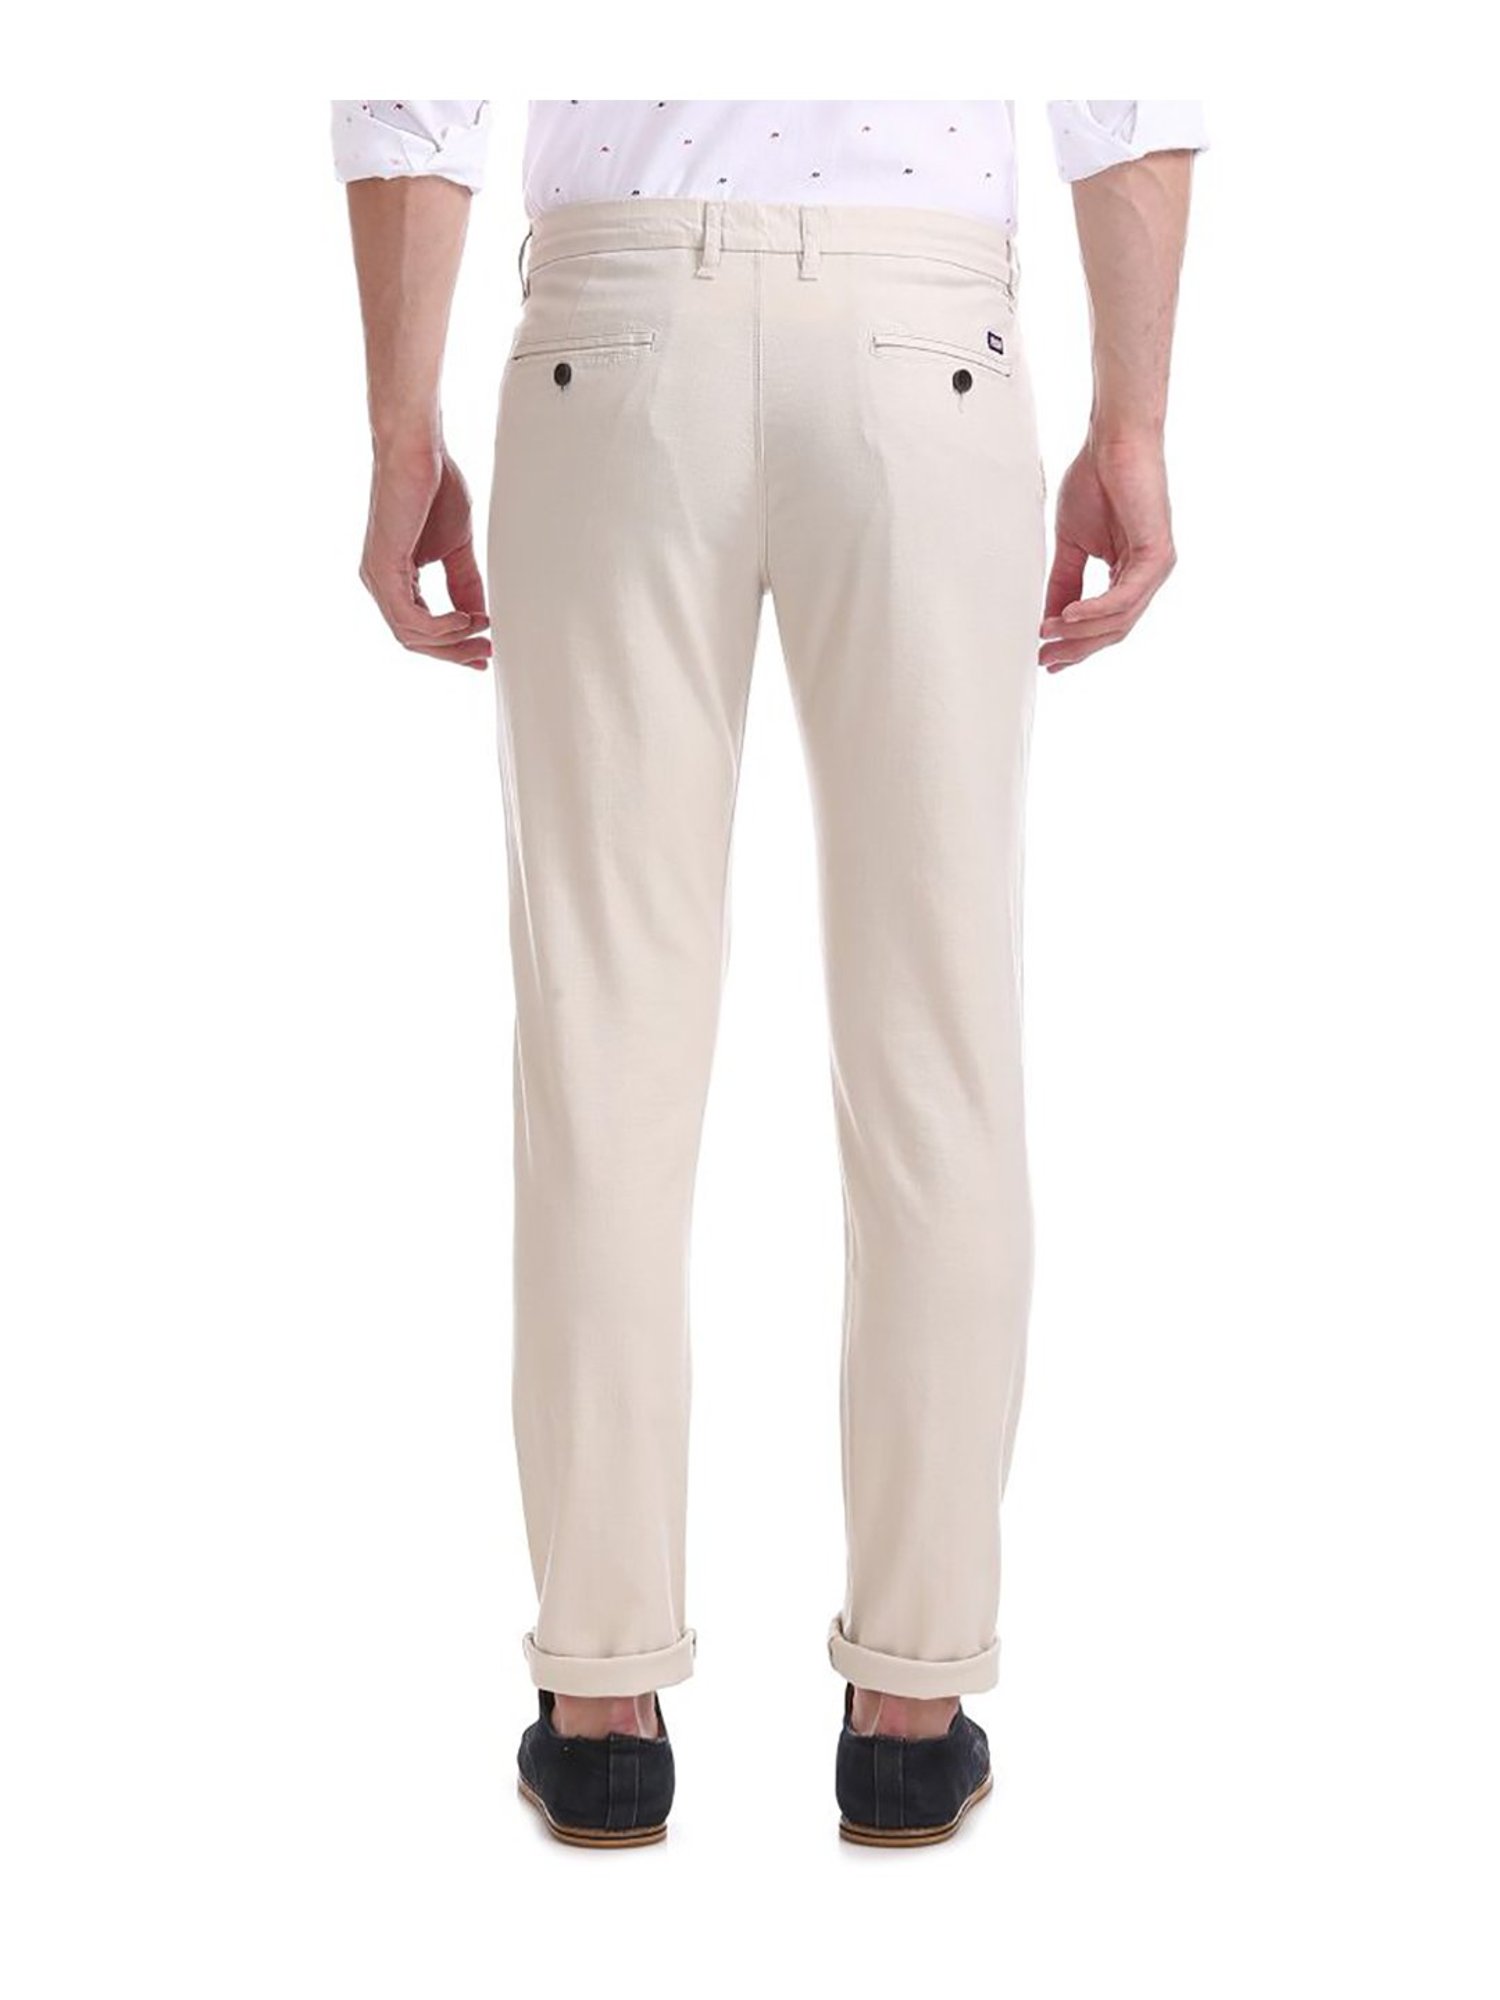 Buy IndiWeaves Mens Linen Off-White Formal Trouser at Amazon.in